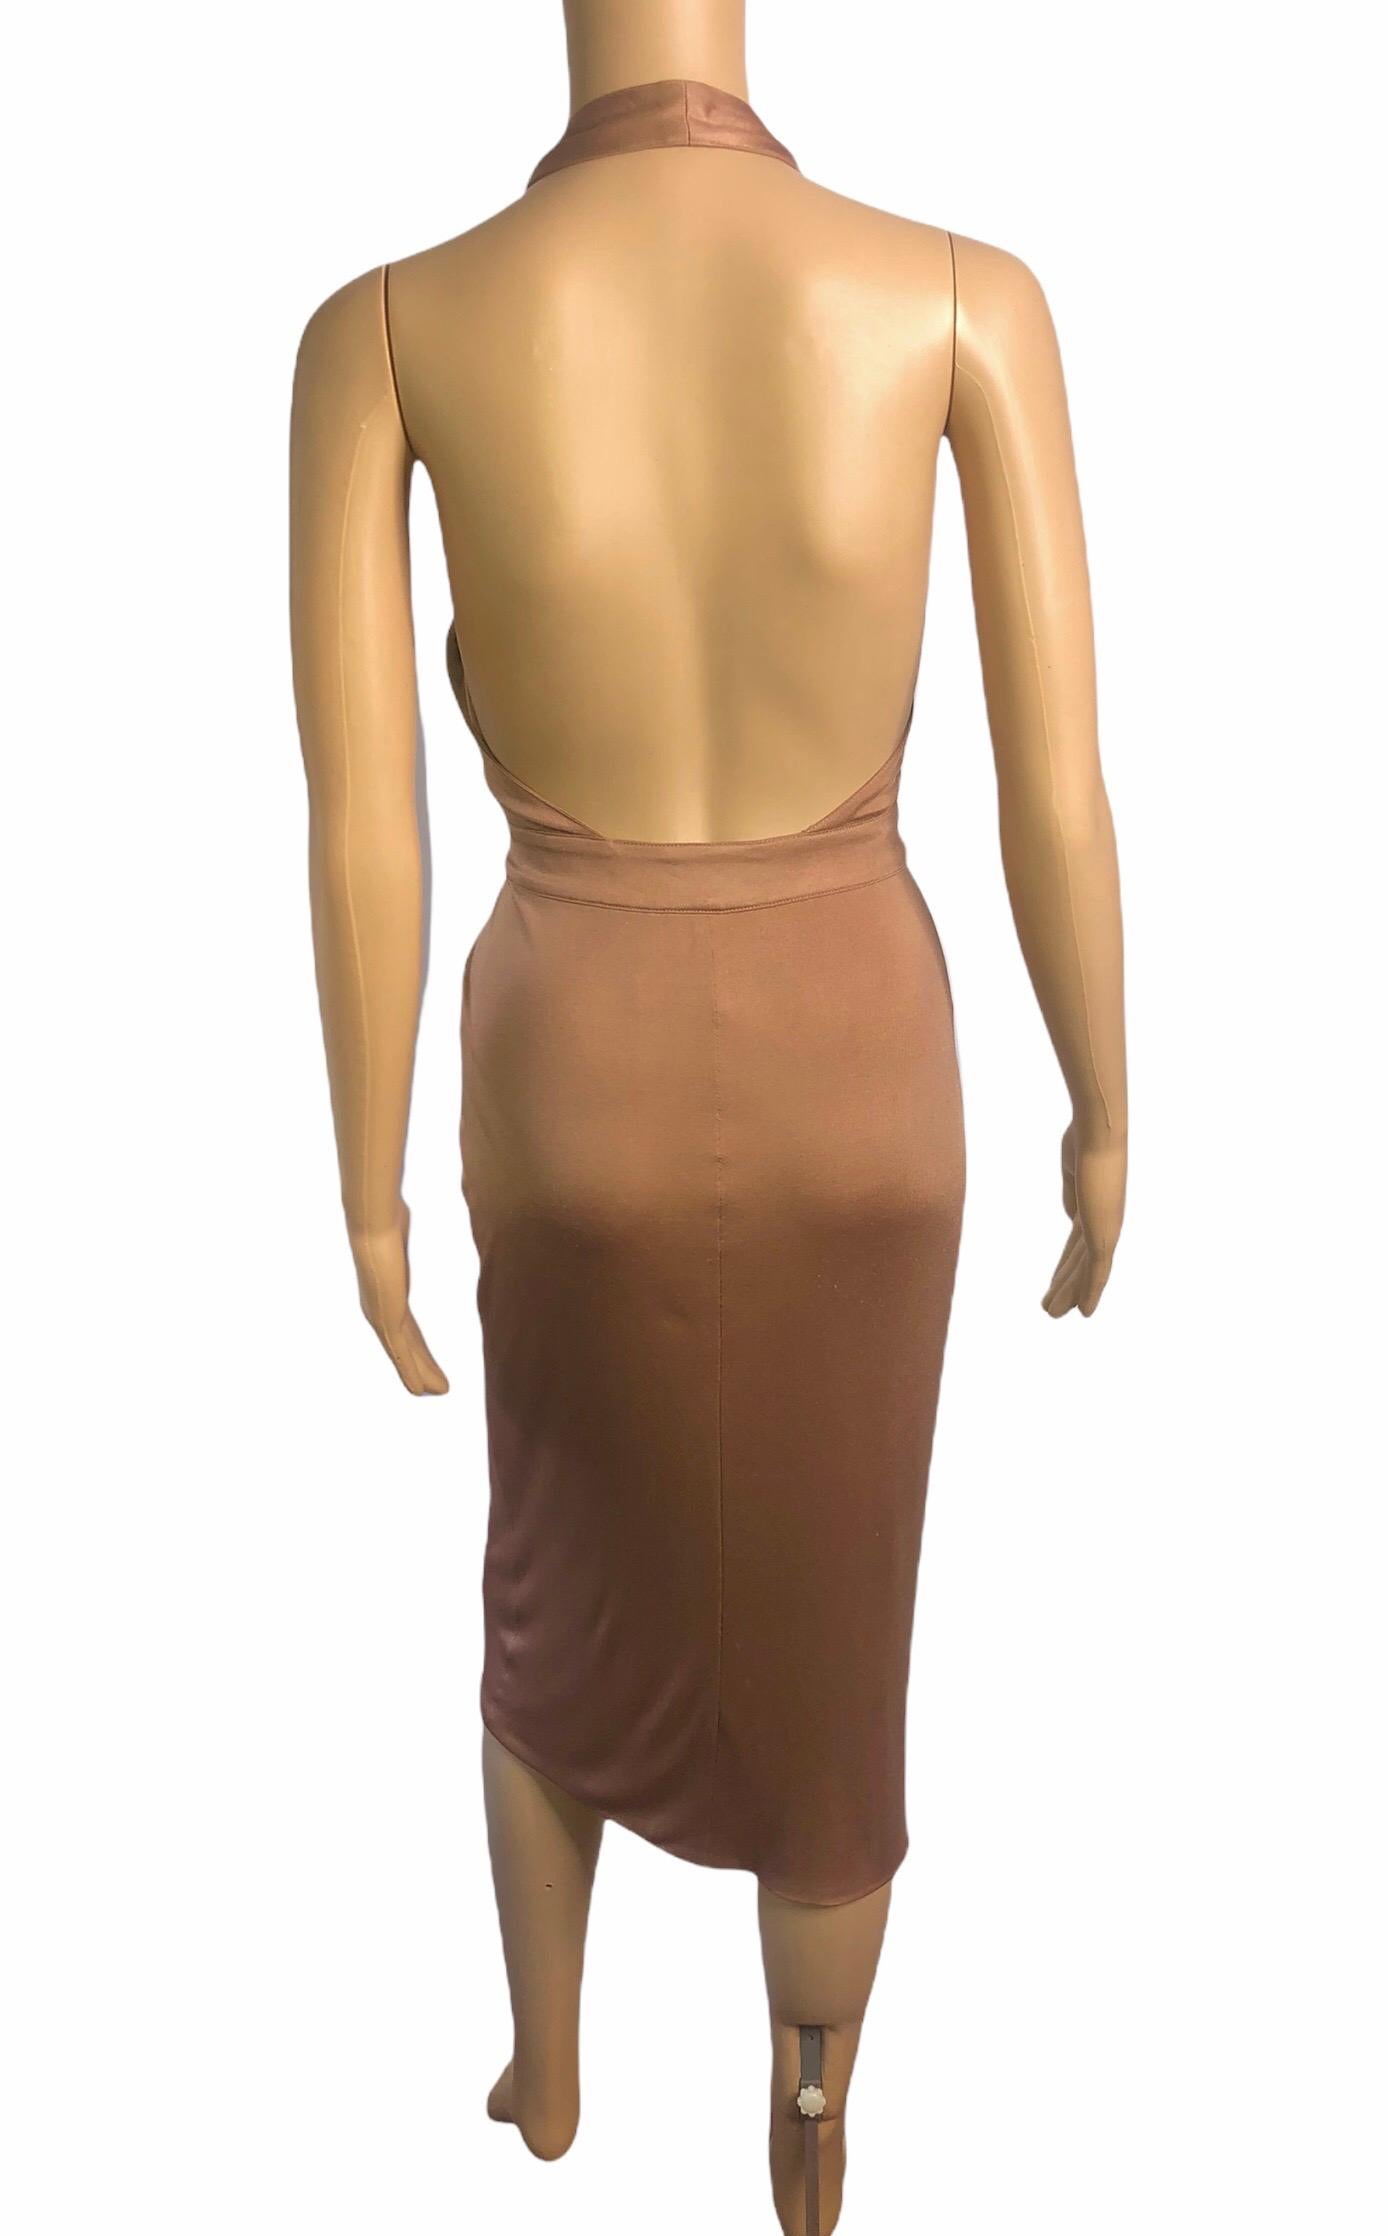 Versace S/S 2005 Runway Logo Belt Plunging Backless Wrap Dress IT 42

Look 8 from the Spring 2005 Collection.
